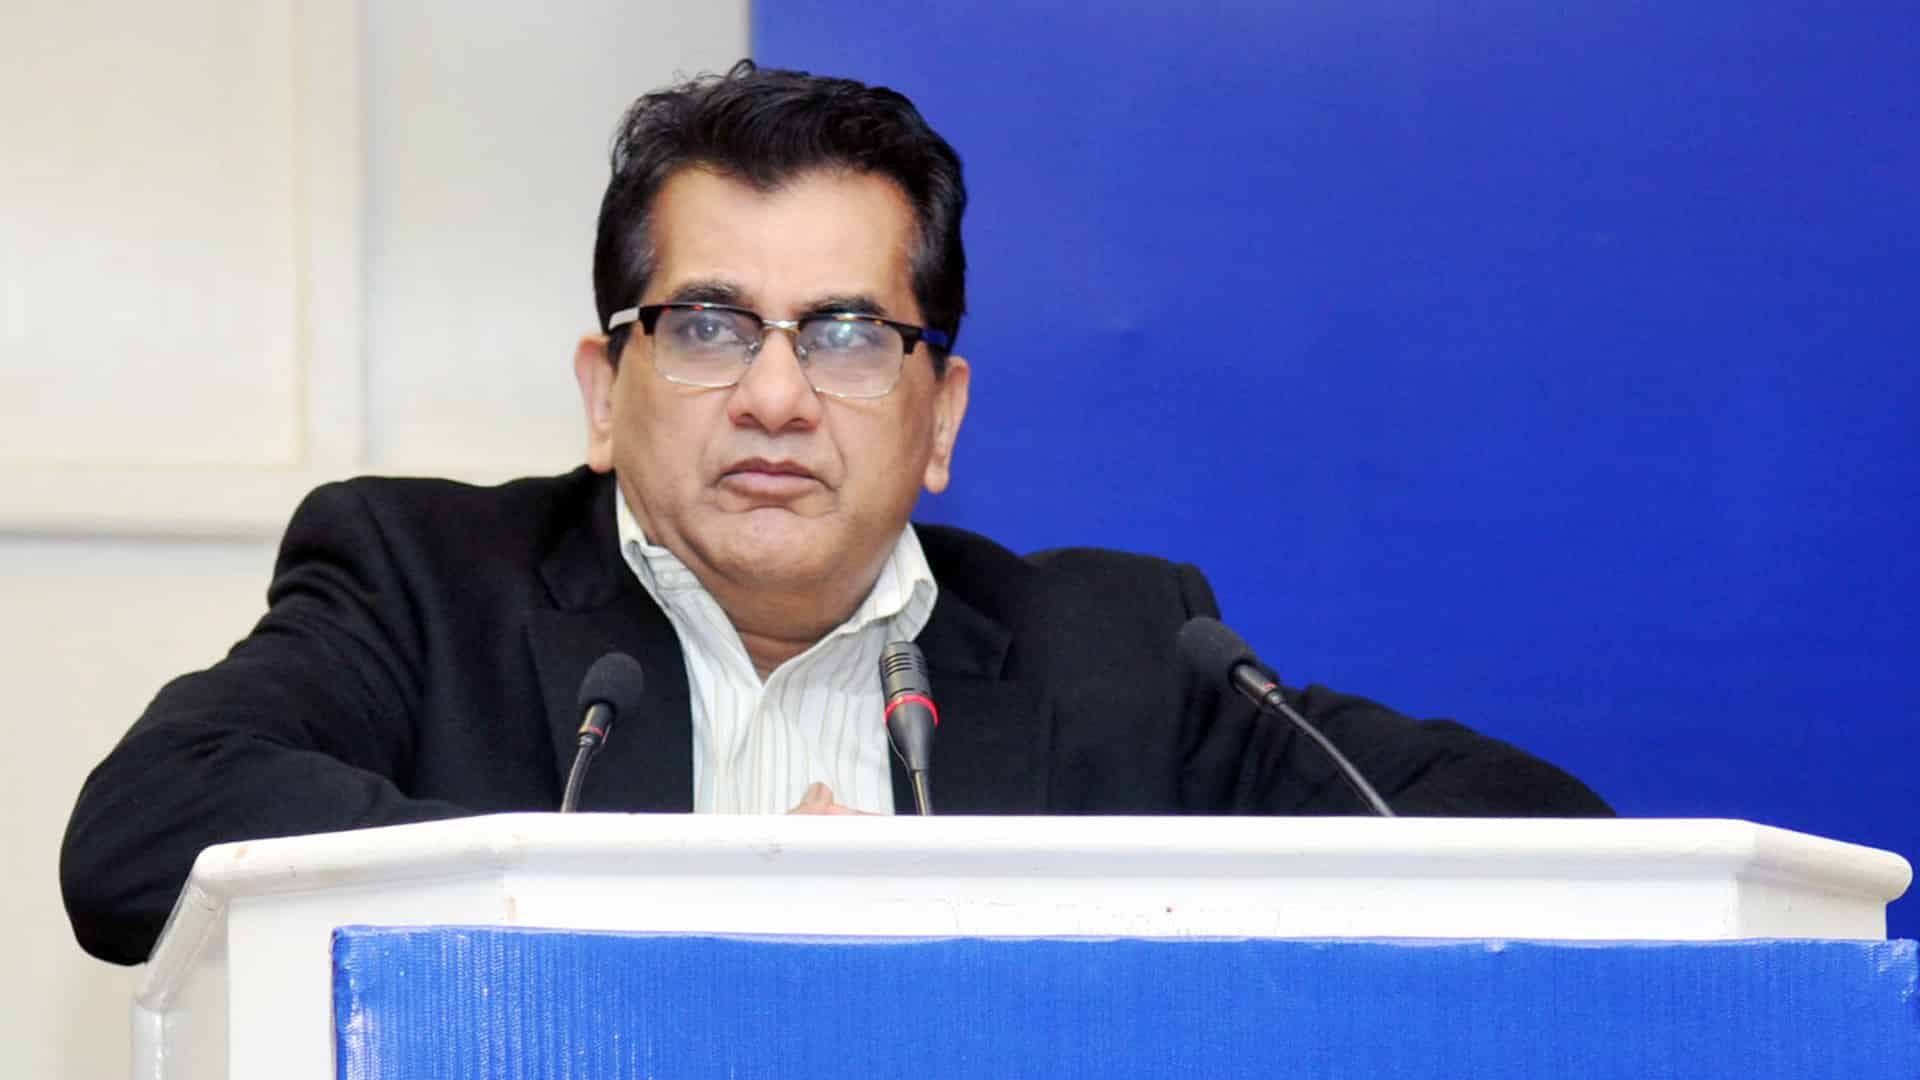 Policy should be pro-innovation, light touch, says Niti Aayog CEO